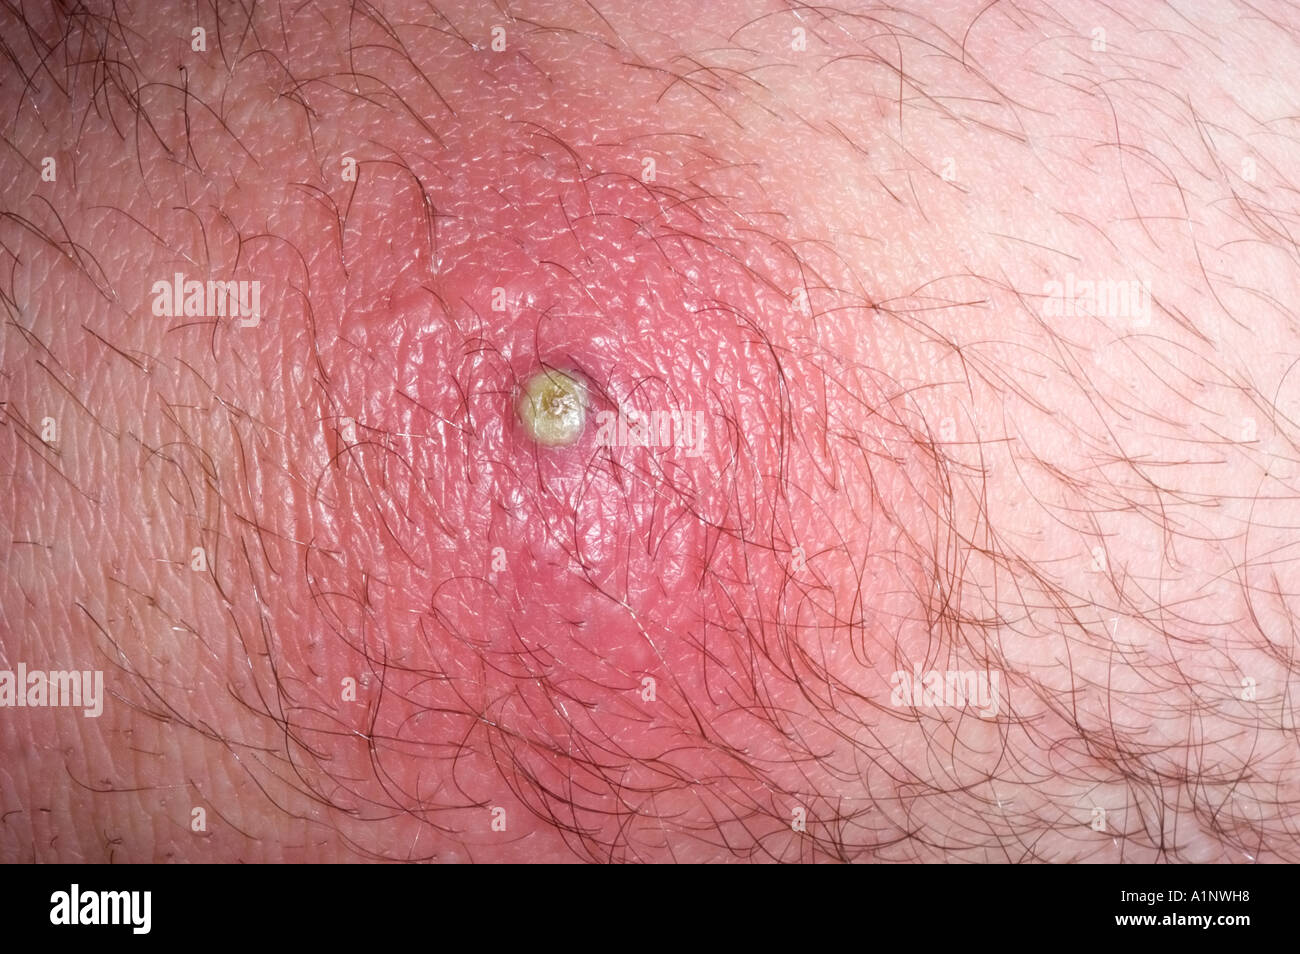 Staphylococci On The Surface Of Skin Stock Photo - Download Image Now -  Staphylococcus, MRSA, Bacterium - iStock